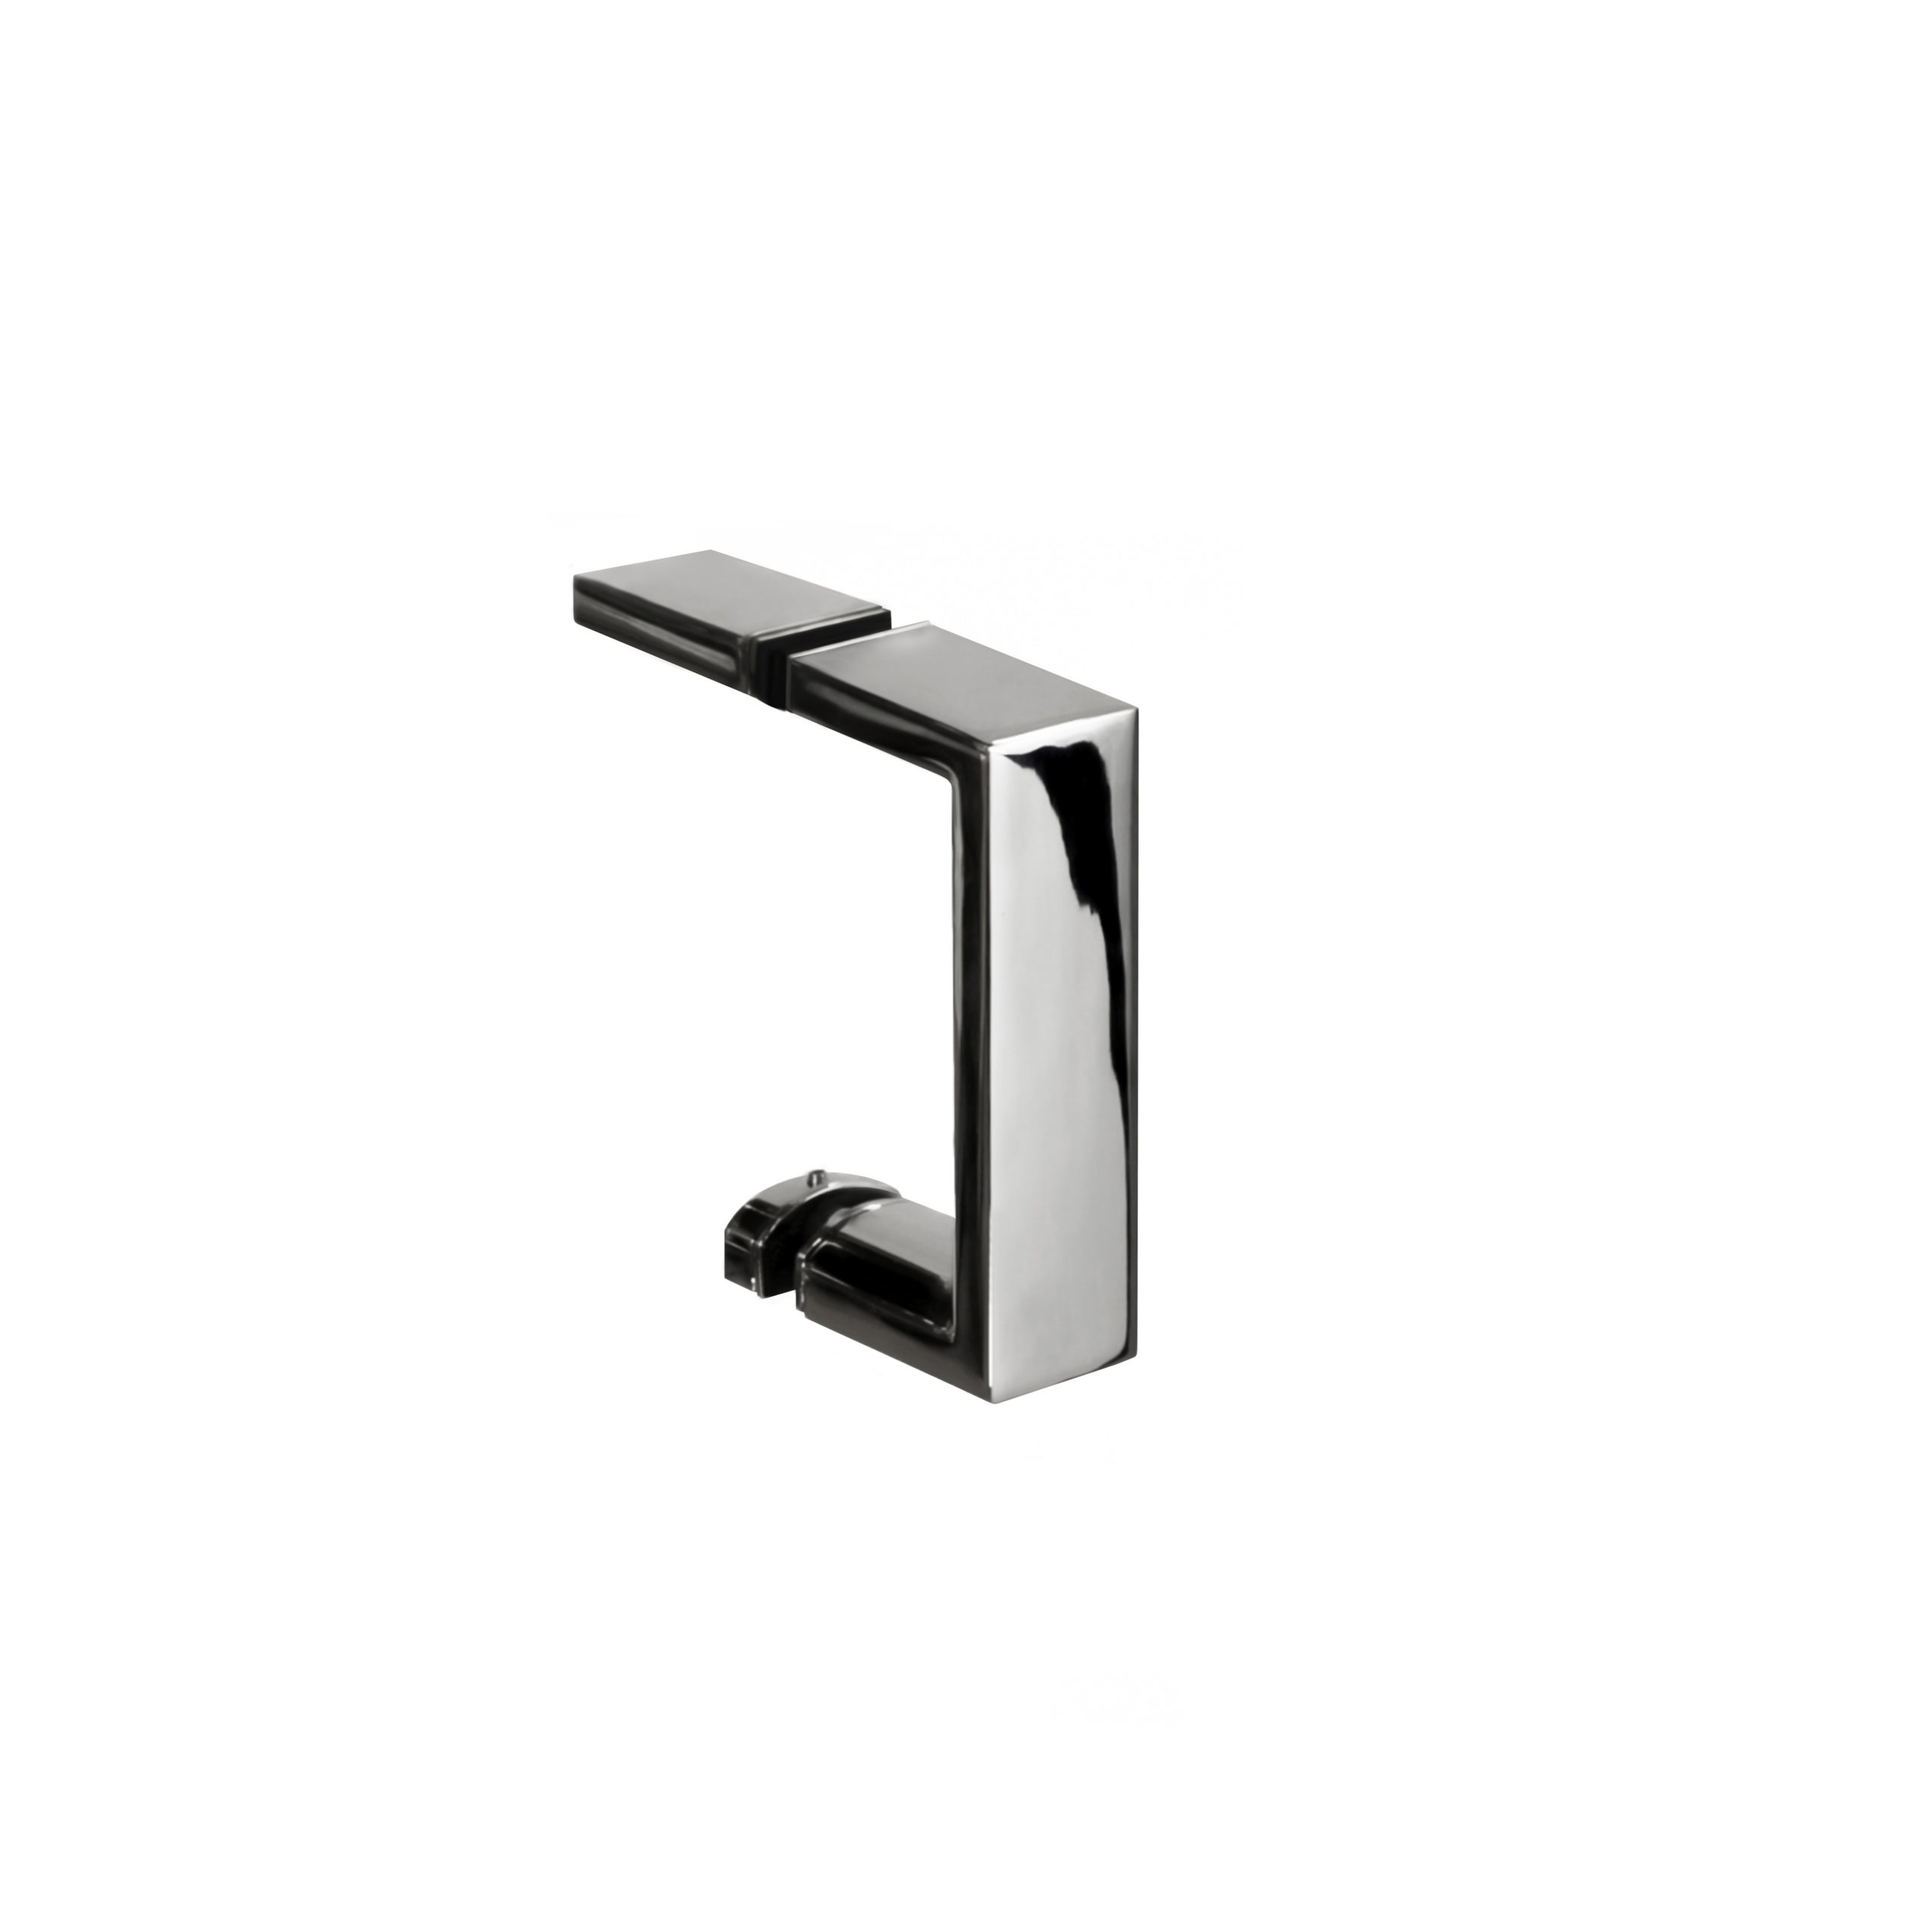 Polished stainless modern door handle and pull - product featured image - 3.5 inch length - product SKU UP 601-5 PSS